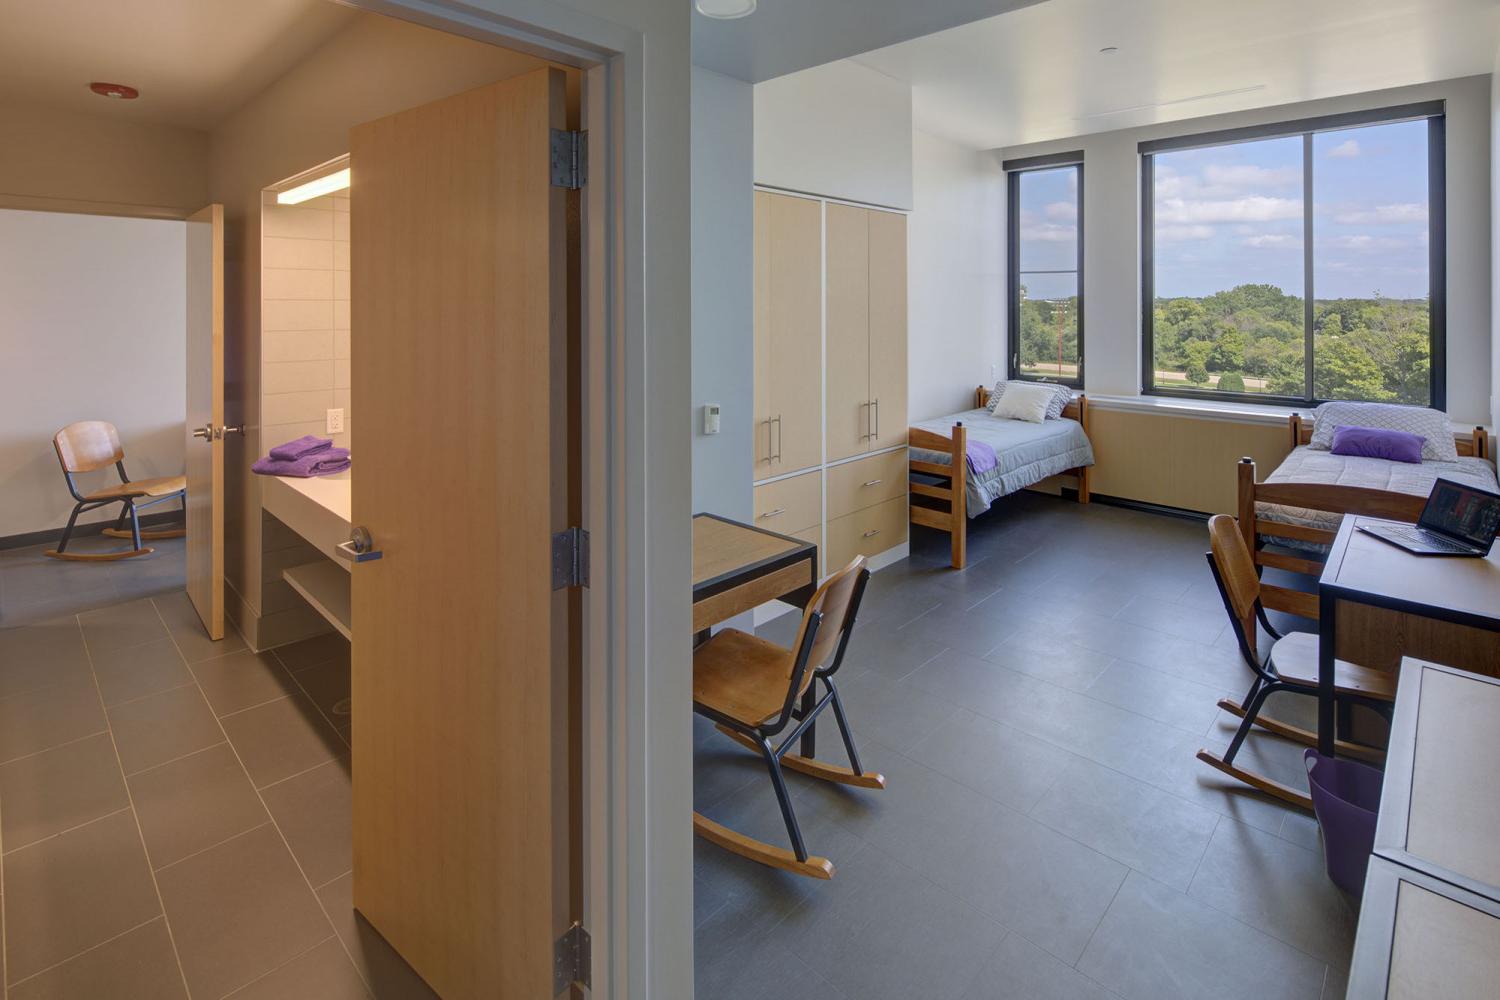 A dorm room in The Tower.